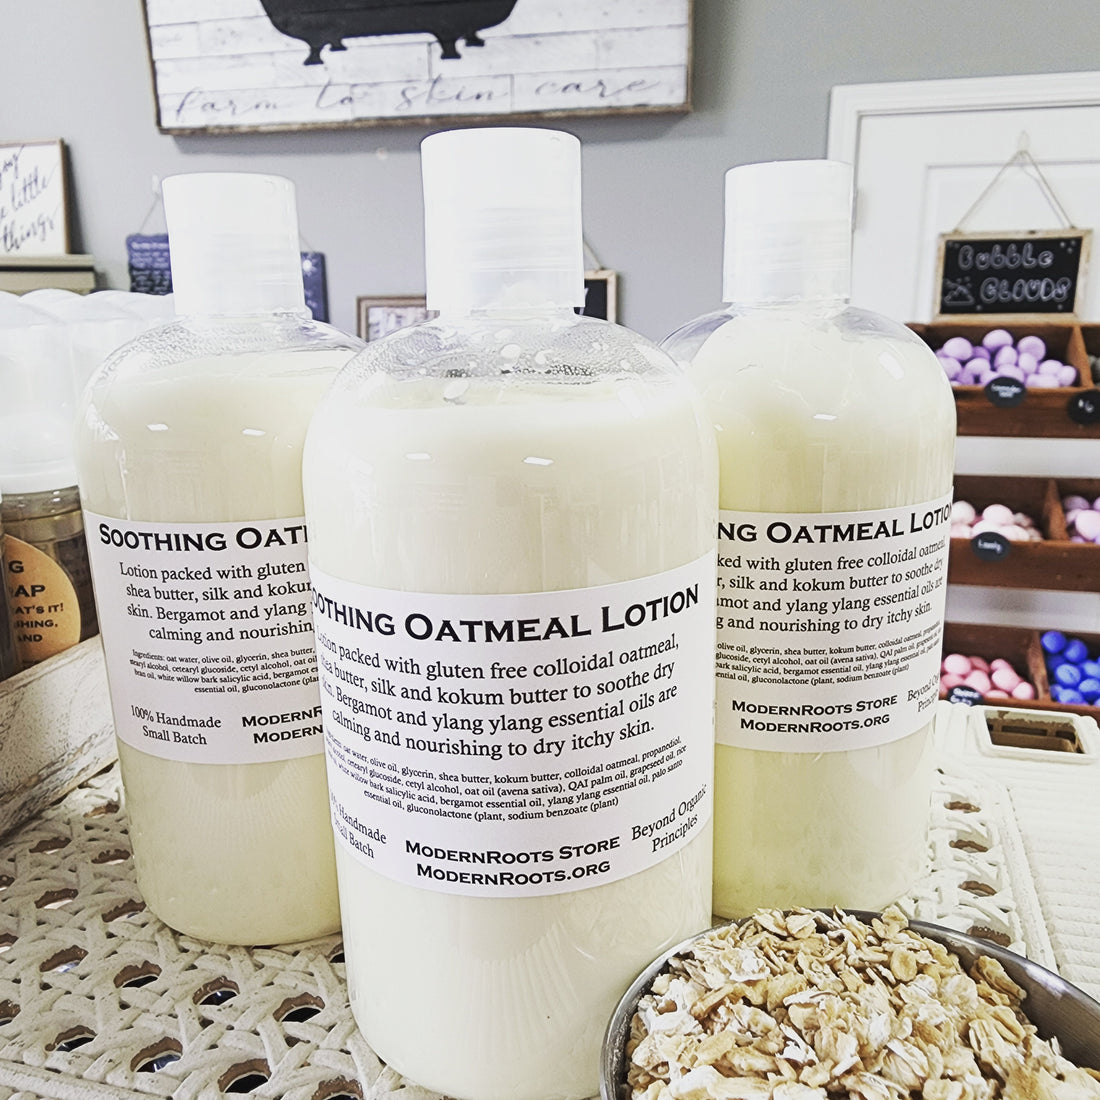 Soothing Oatmeal Lotion